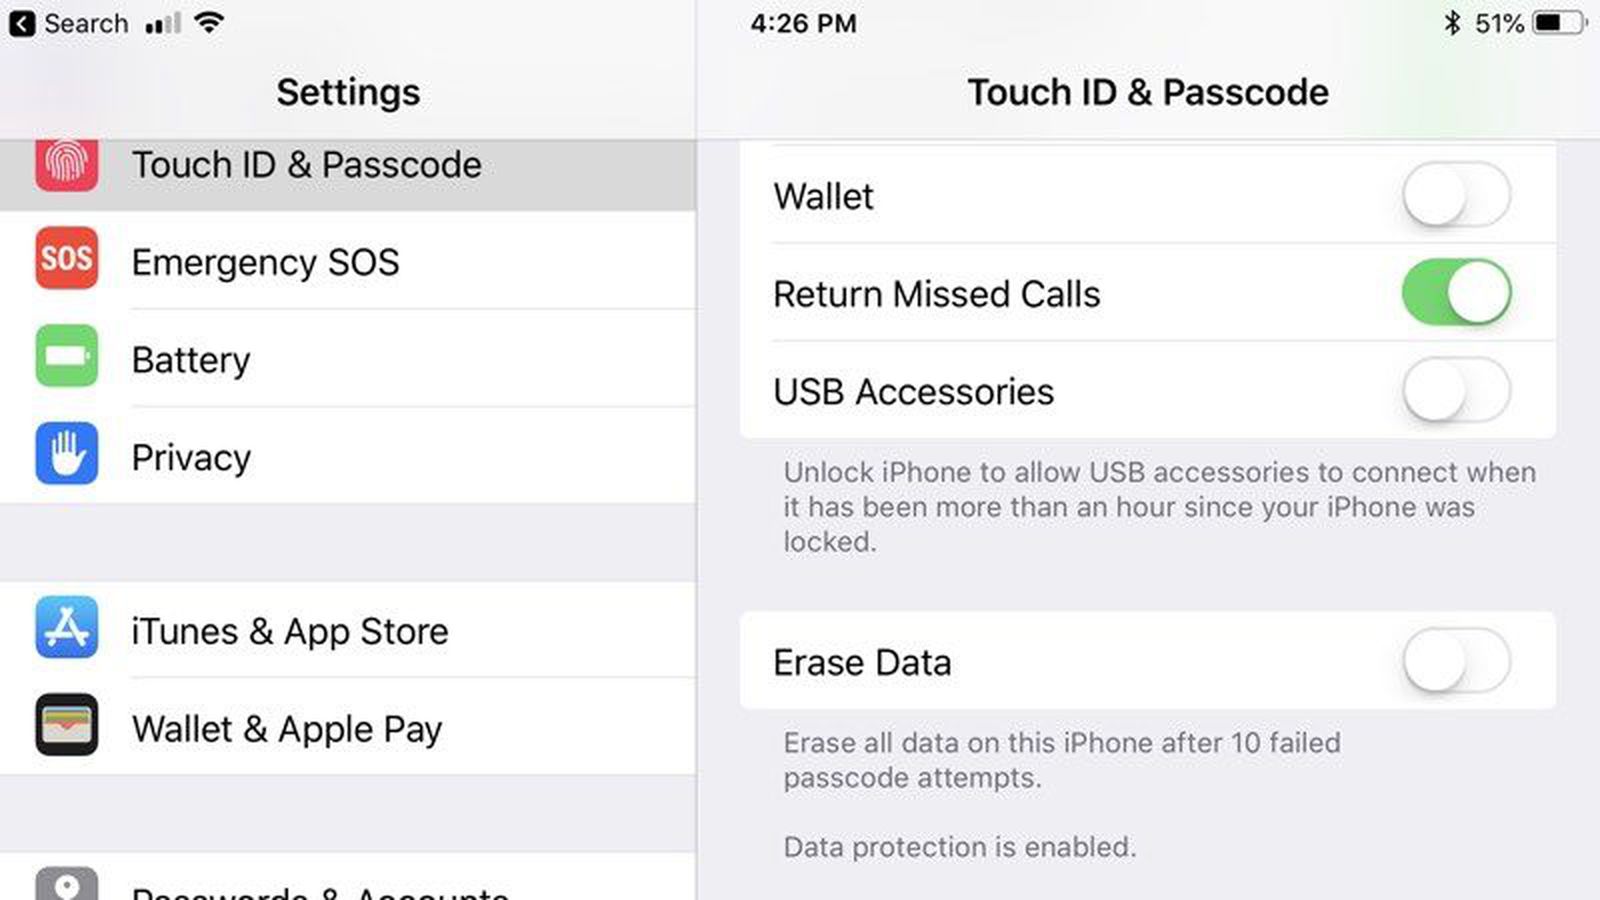 iOS 12 Includes Setting to Disable USB Access When an iPhone Hasn't Been Unlocked Than an Hour - MacRumors